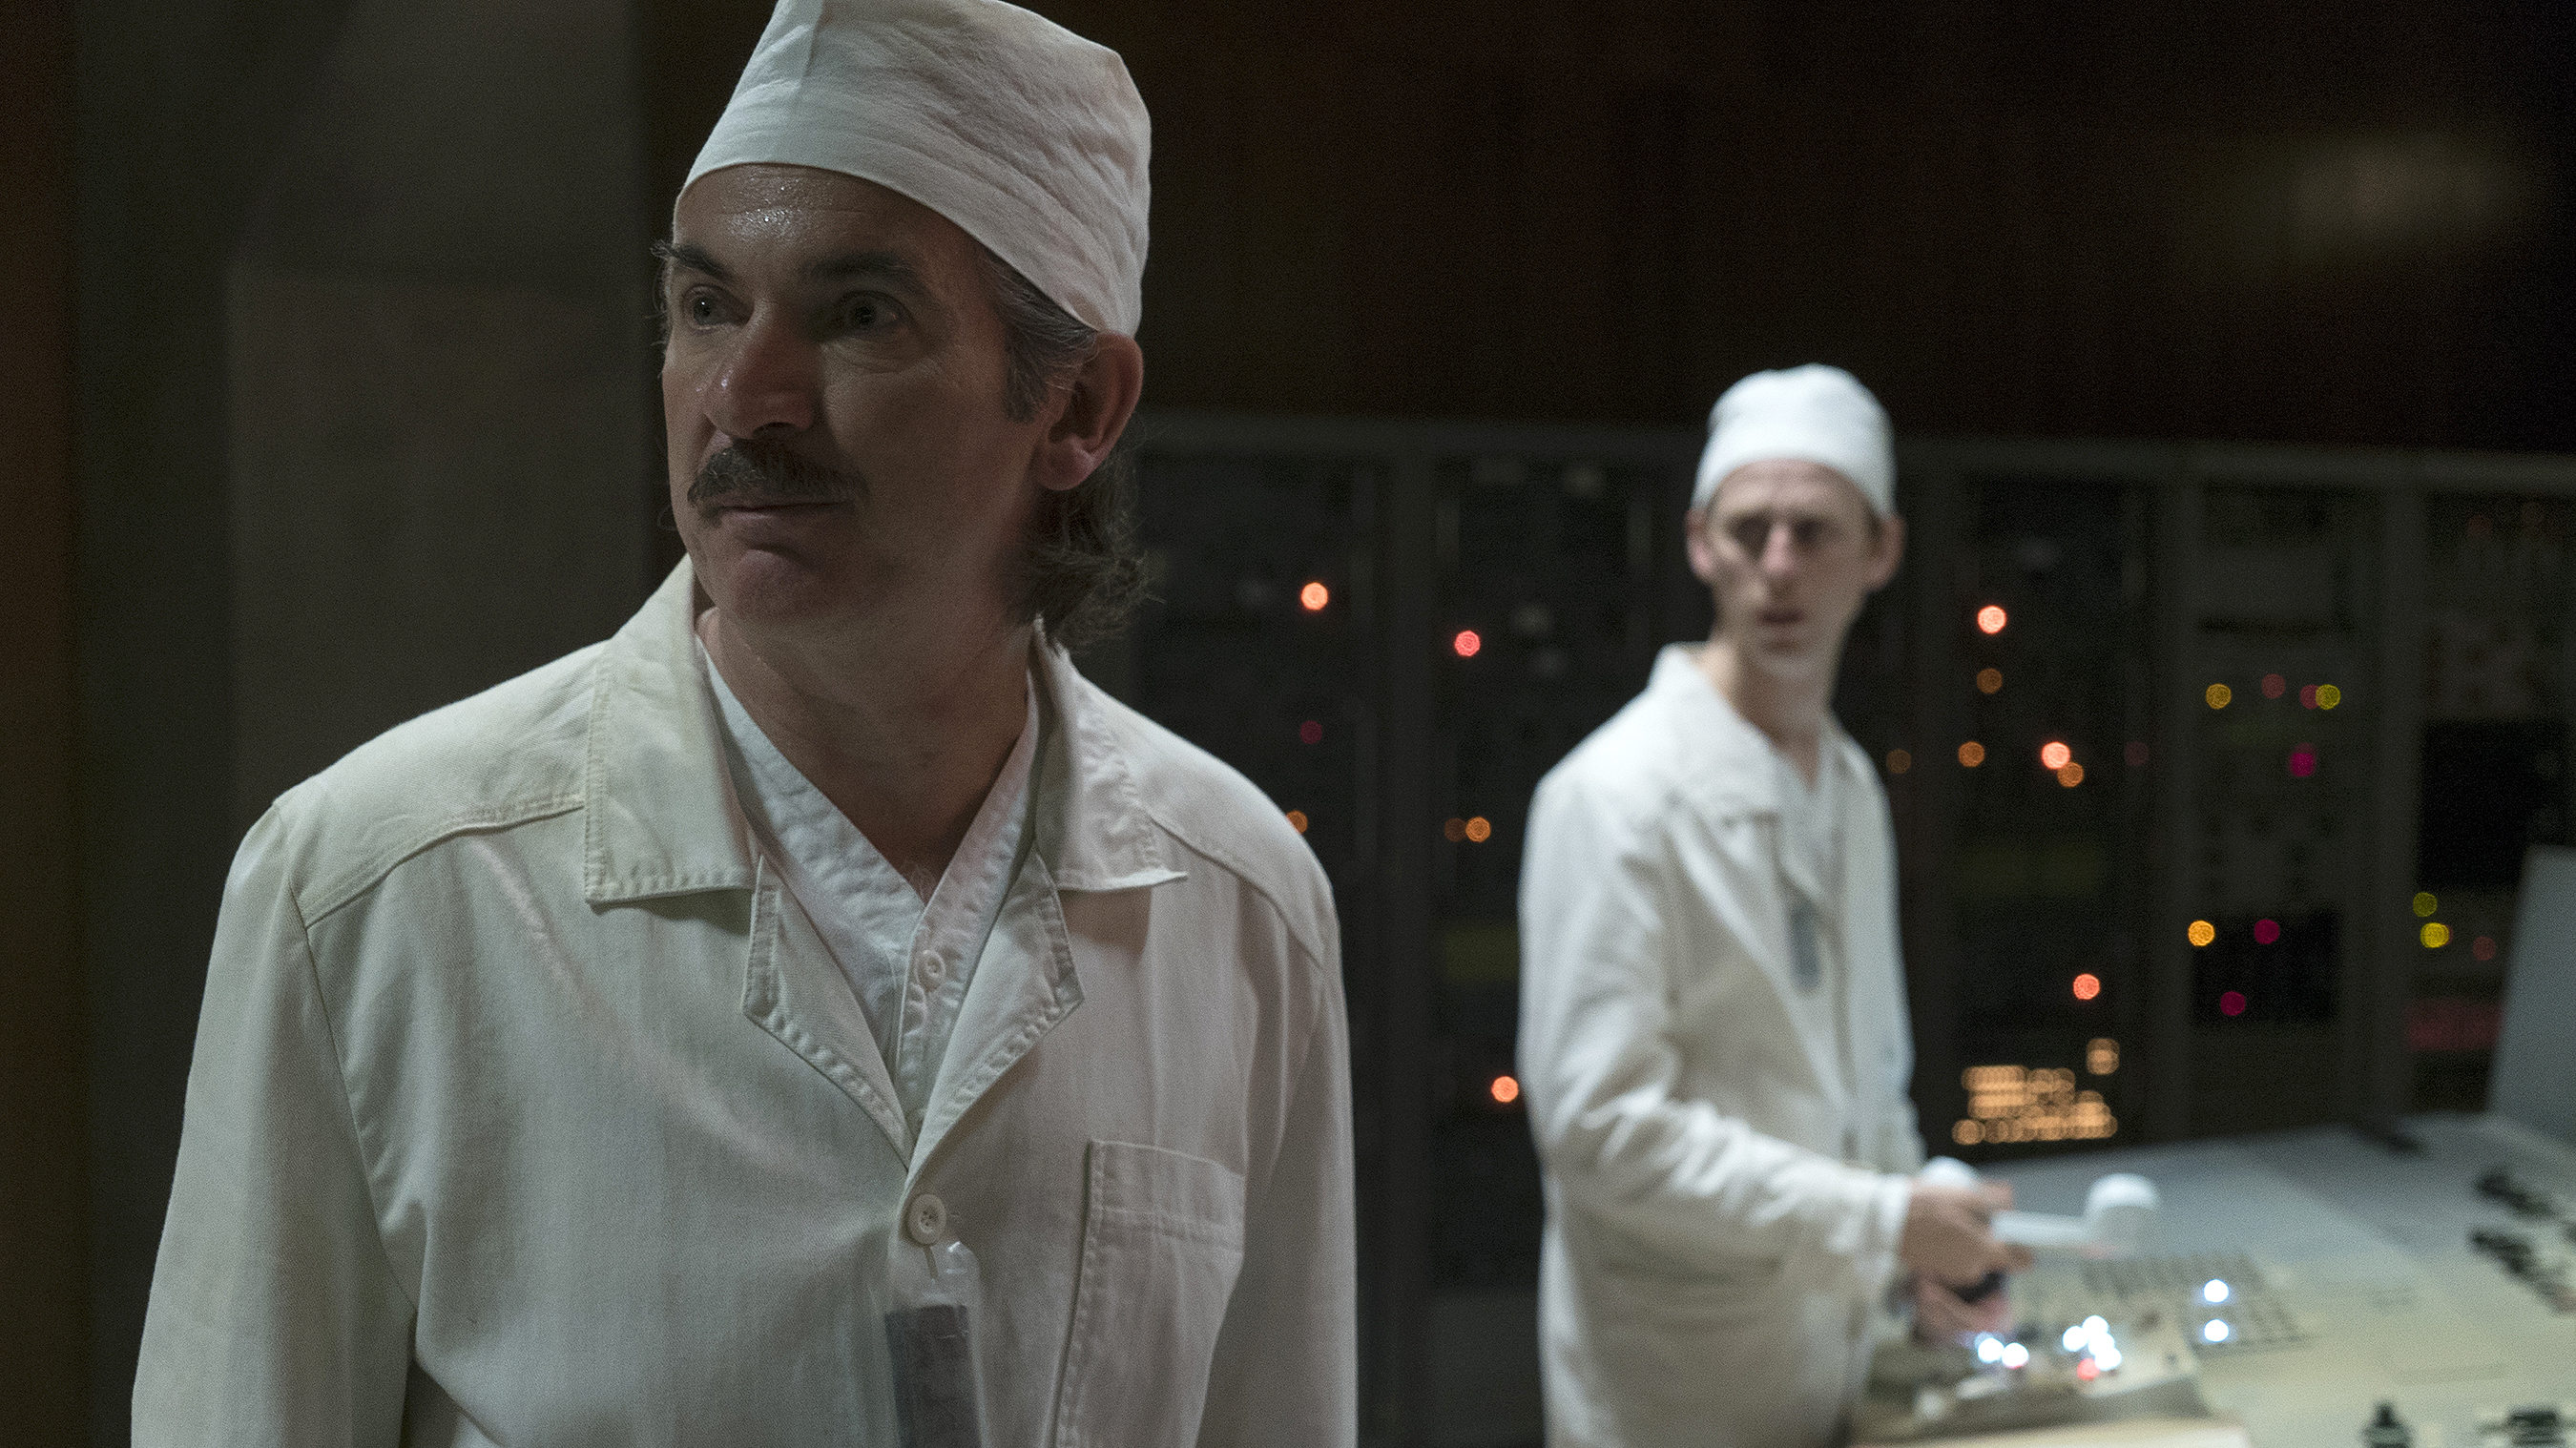 ‘Chernobyl’ episode 5 air date